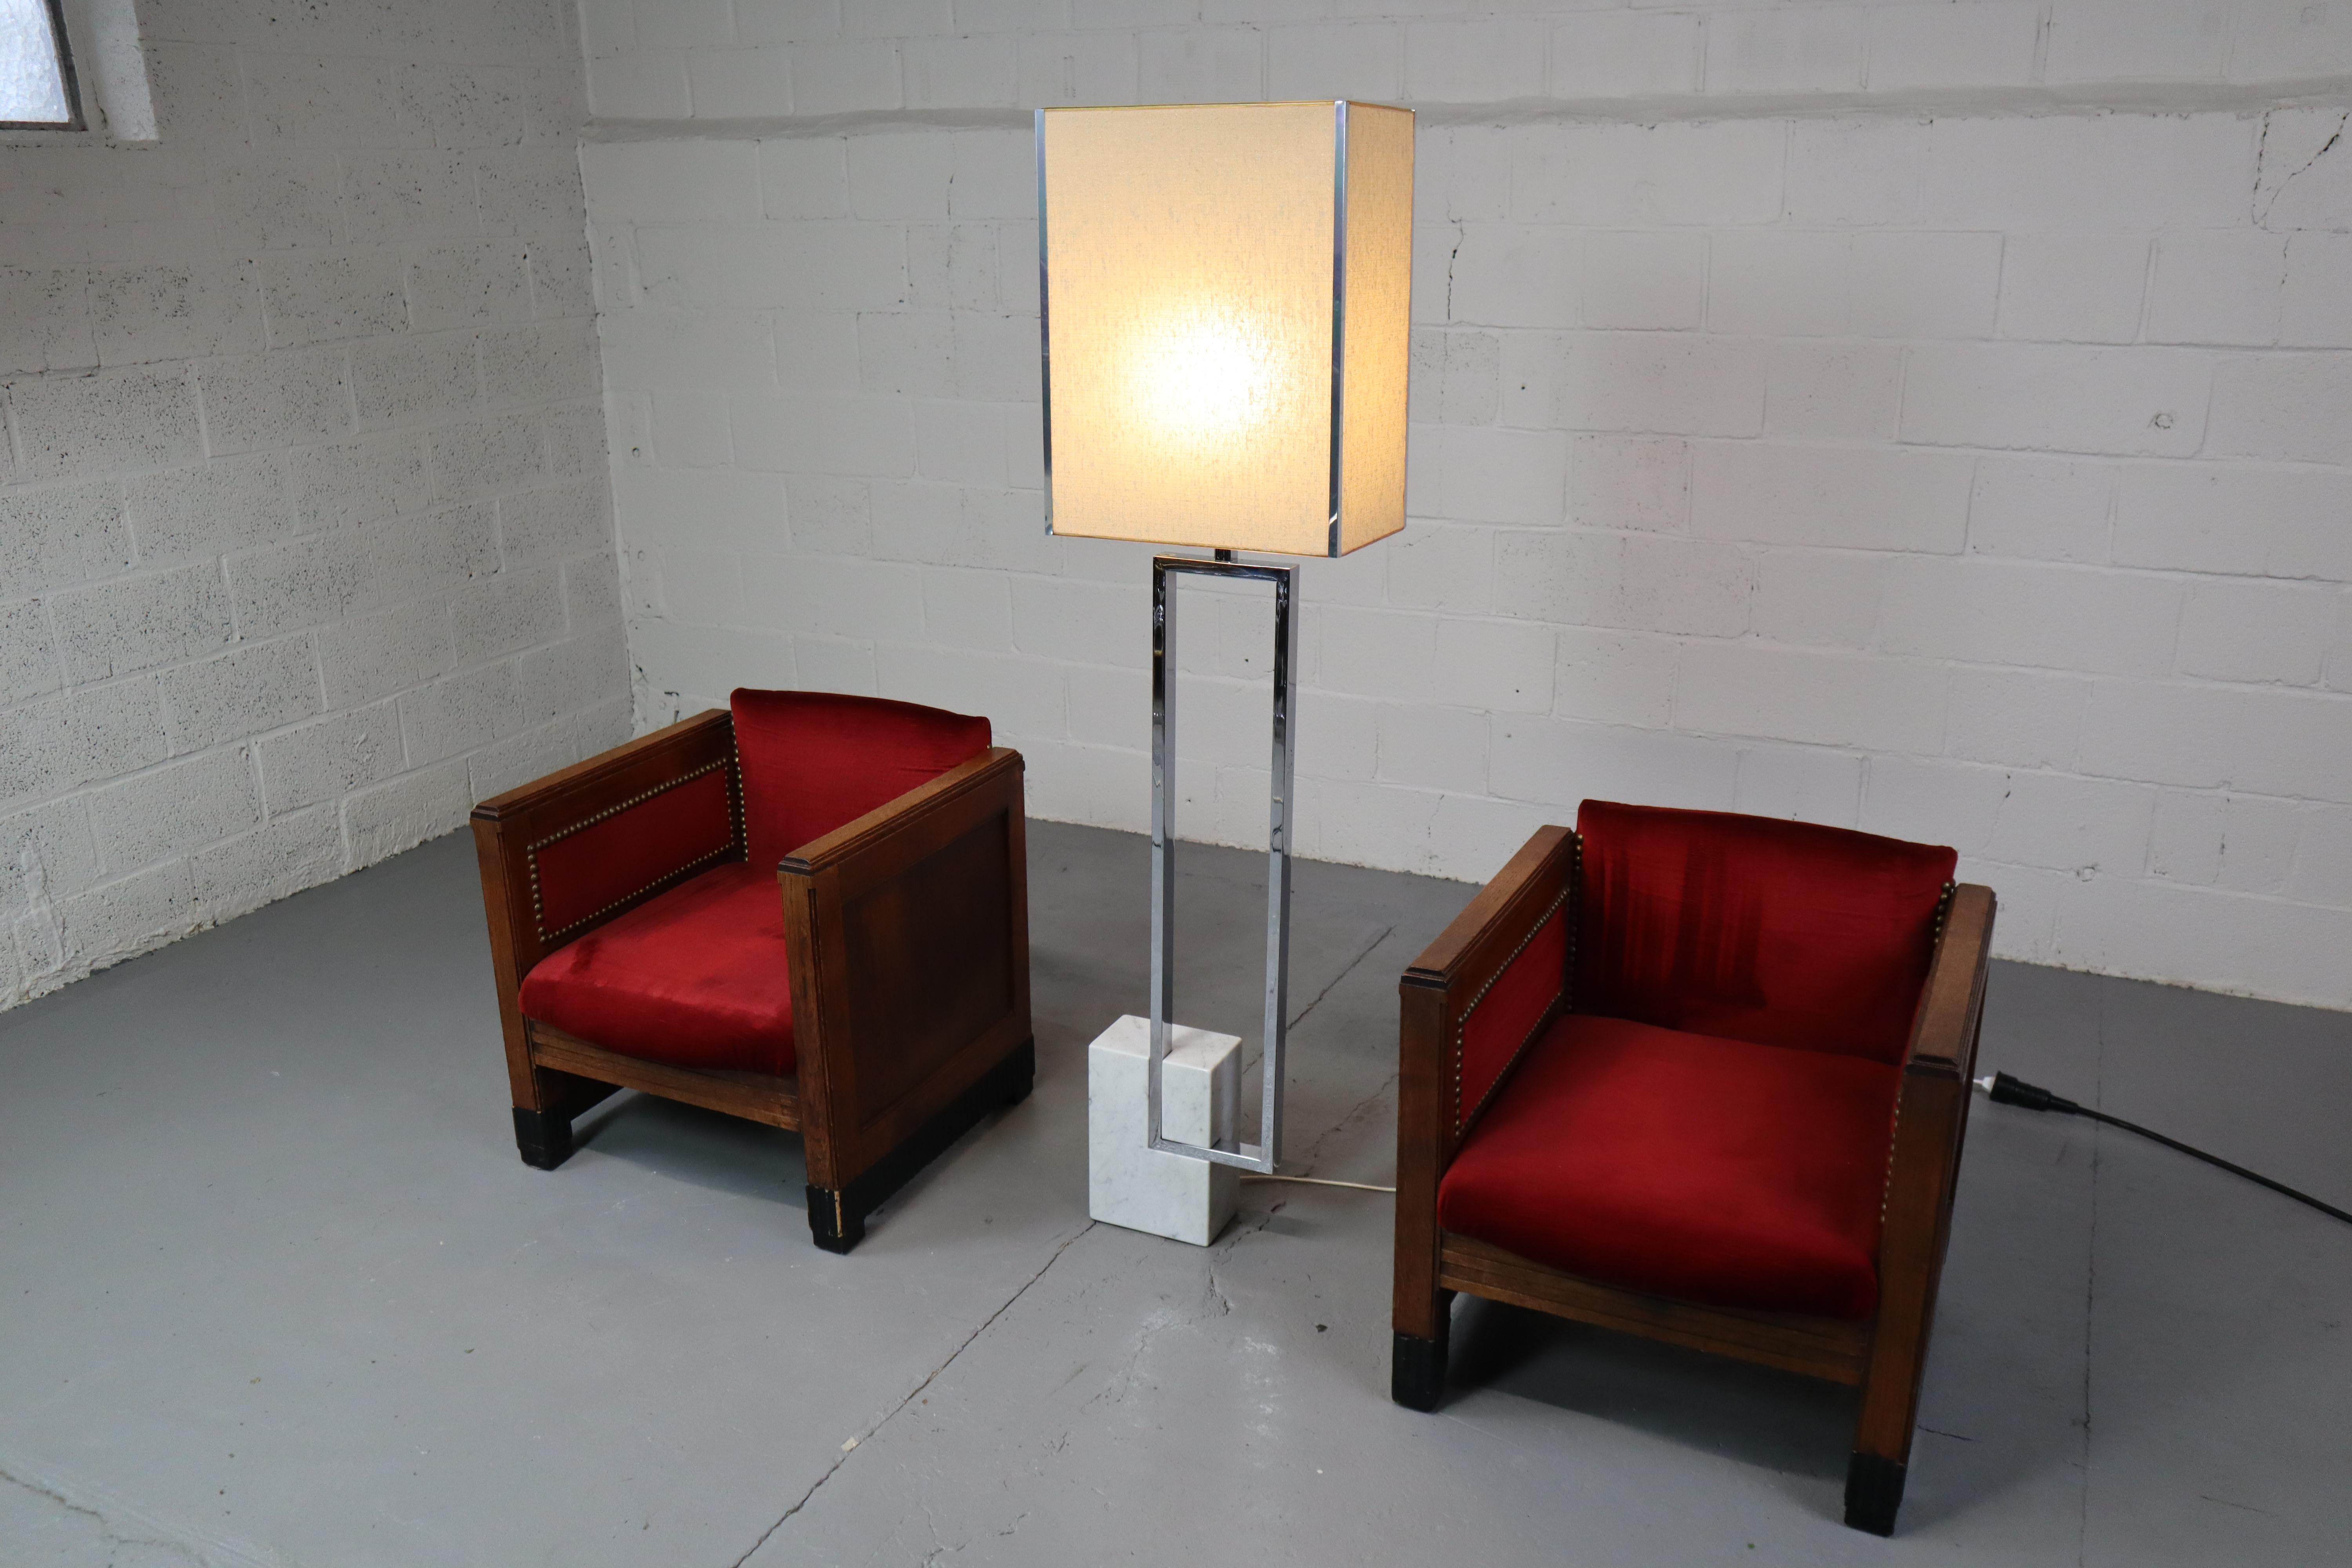 This rare floor lamp is a design by Giovanni Banci and produced in the 1970s by Banci Firenze. The lamp has a marble base with a chrome frame. The shade is original and, like the rest of the lamp, in very good condition! An eye-catcher for your home